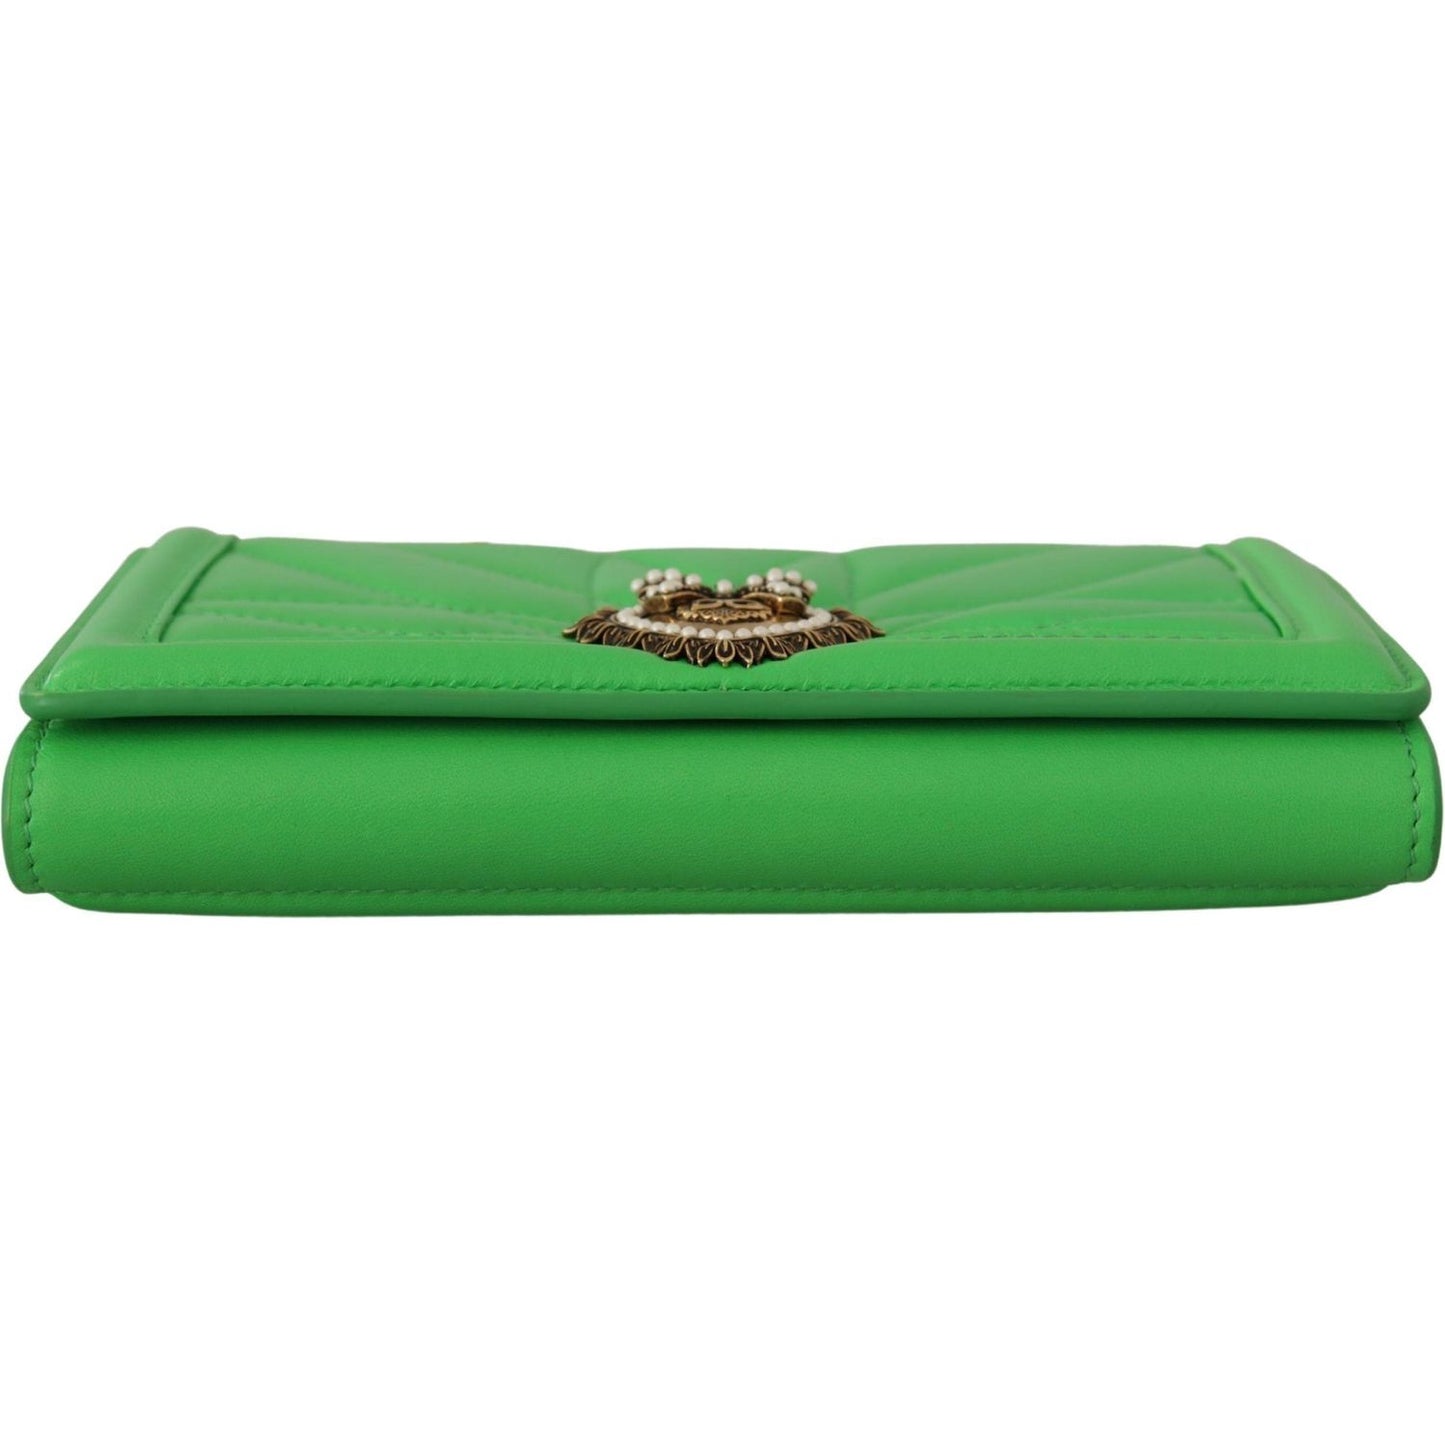 Dolce & Gabbana Elegant Leather iPhone Wallet Case with Chain green-leather-devotion-cardholder-iphone-11-pro-wallet IMG_3539-scaled-5de9d832-abf.jpg